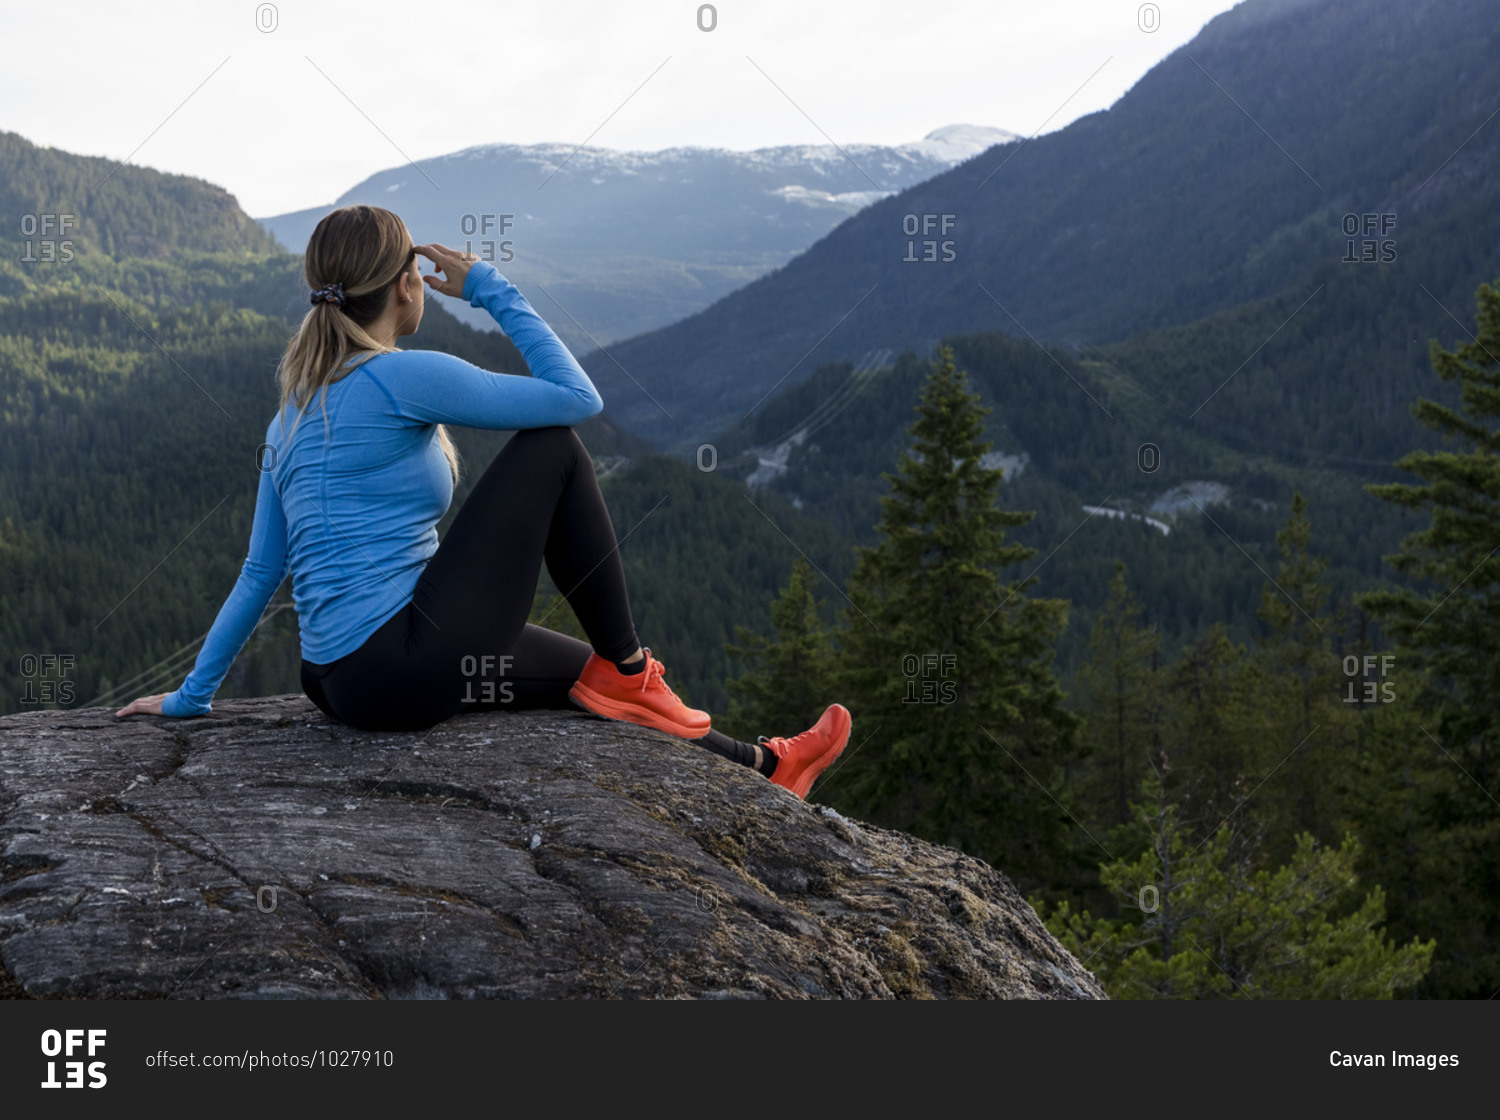 Female athlete sitting and taking a break from trail running against forested mountain ridge during fitness workout in countryside